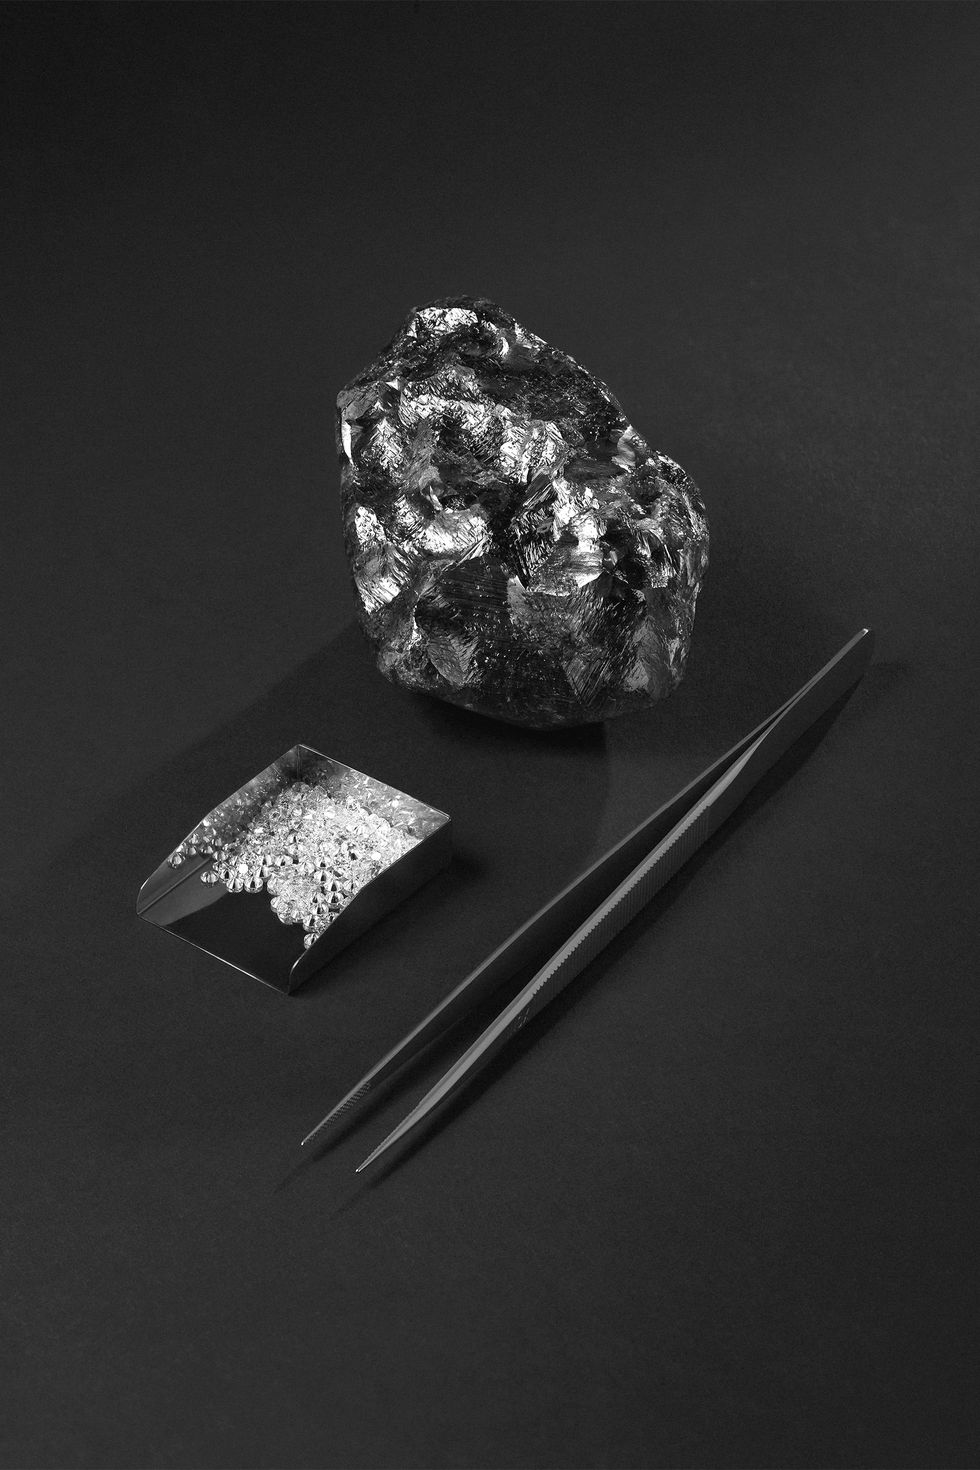 This is what the second-largest diamond in the world looks like